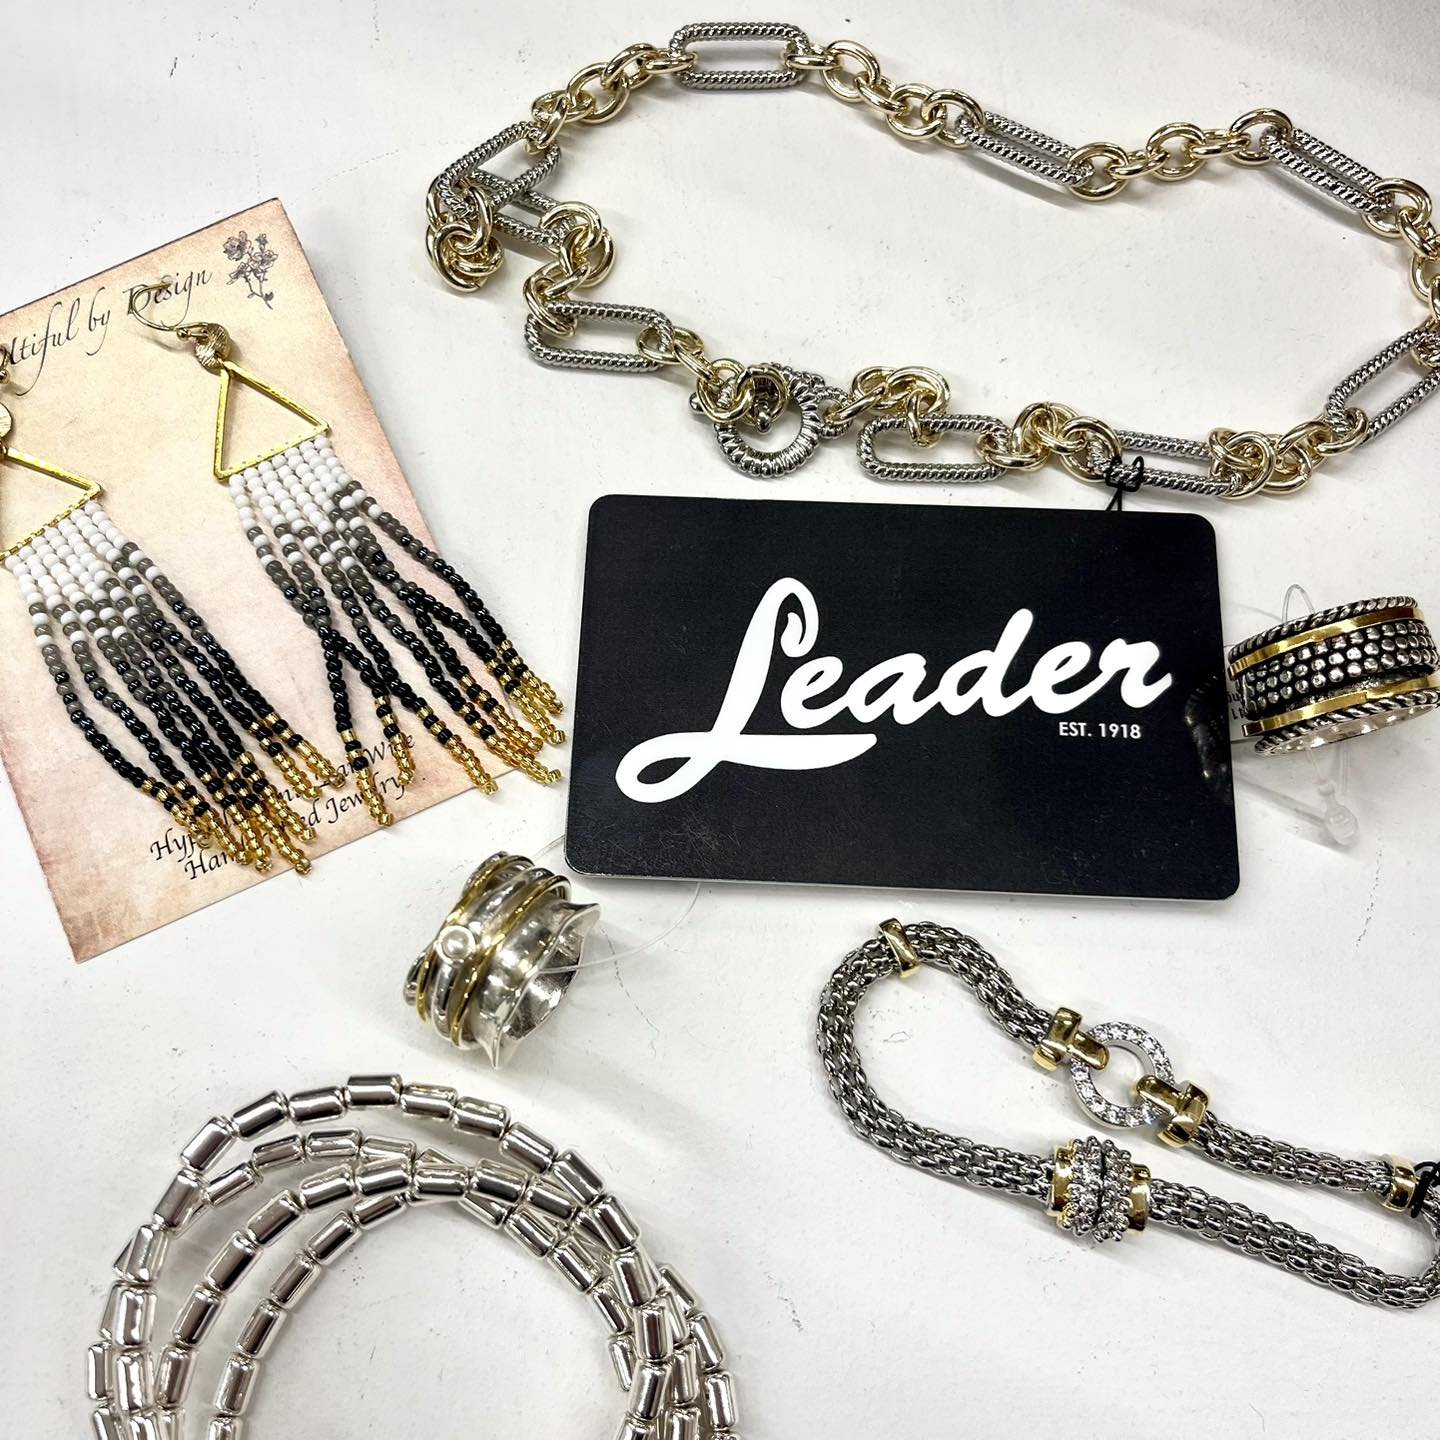 Take advantage of our 50% off a women&rsquo;s accessory offer with any $50 or more purchase of a Leader Gift Card now through Mother&rsquo;s Day. 💝
.
.
.
.